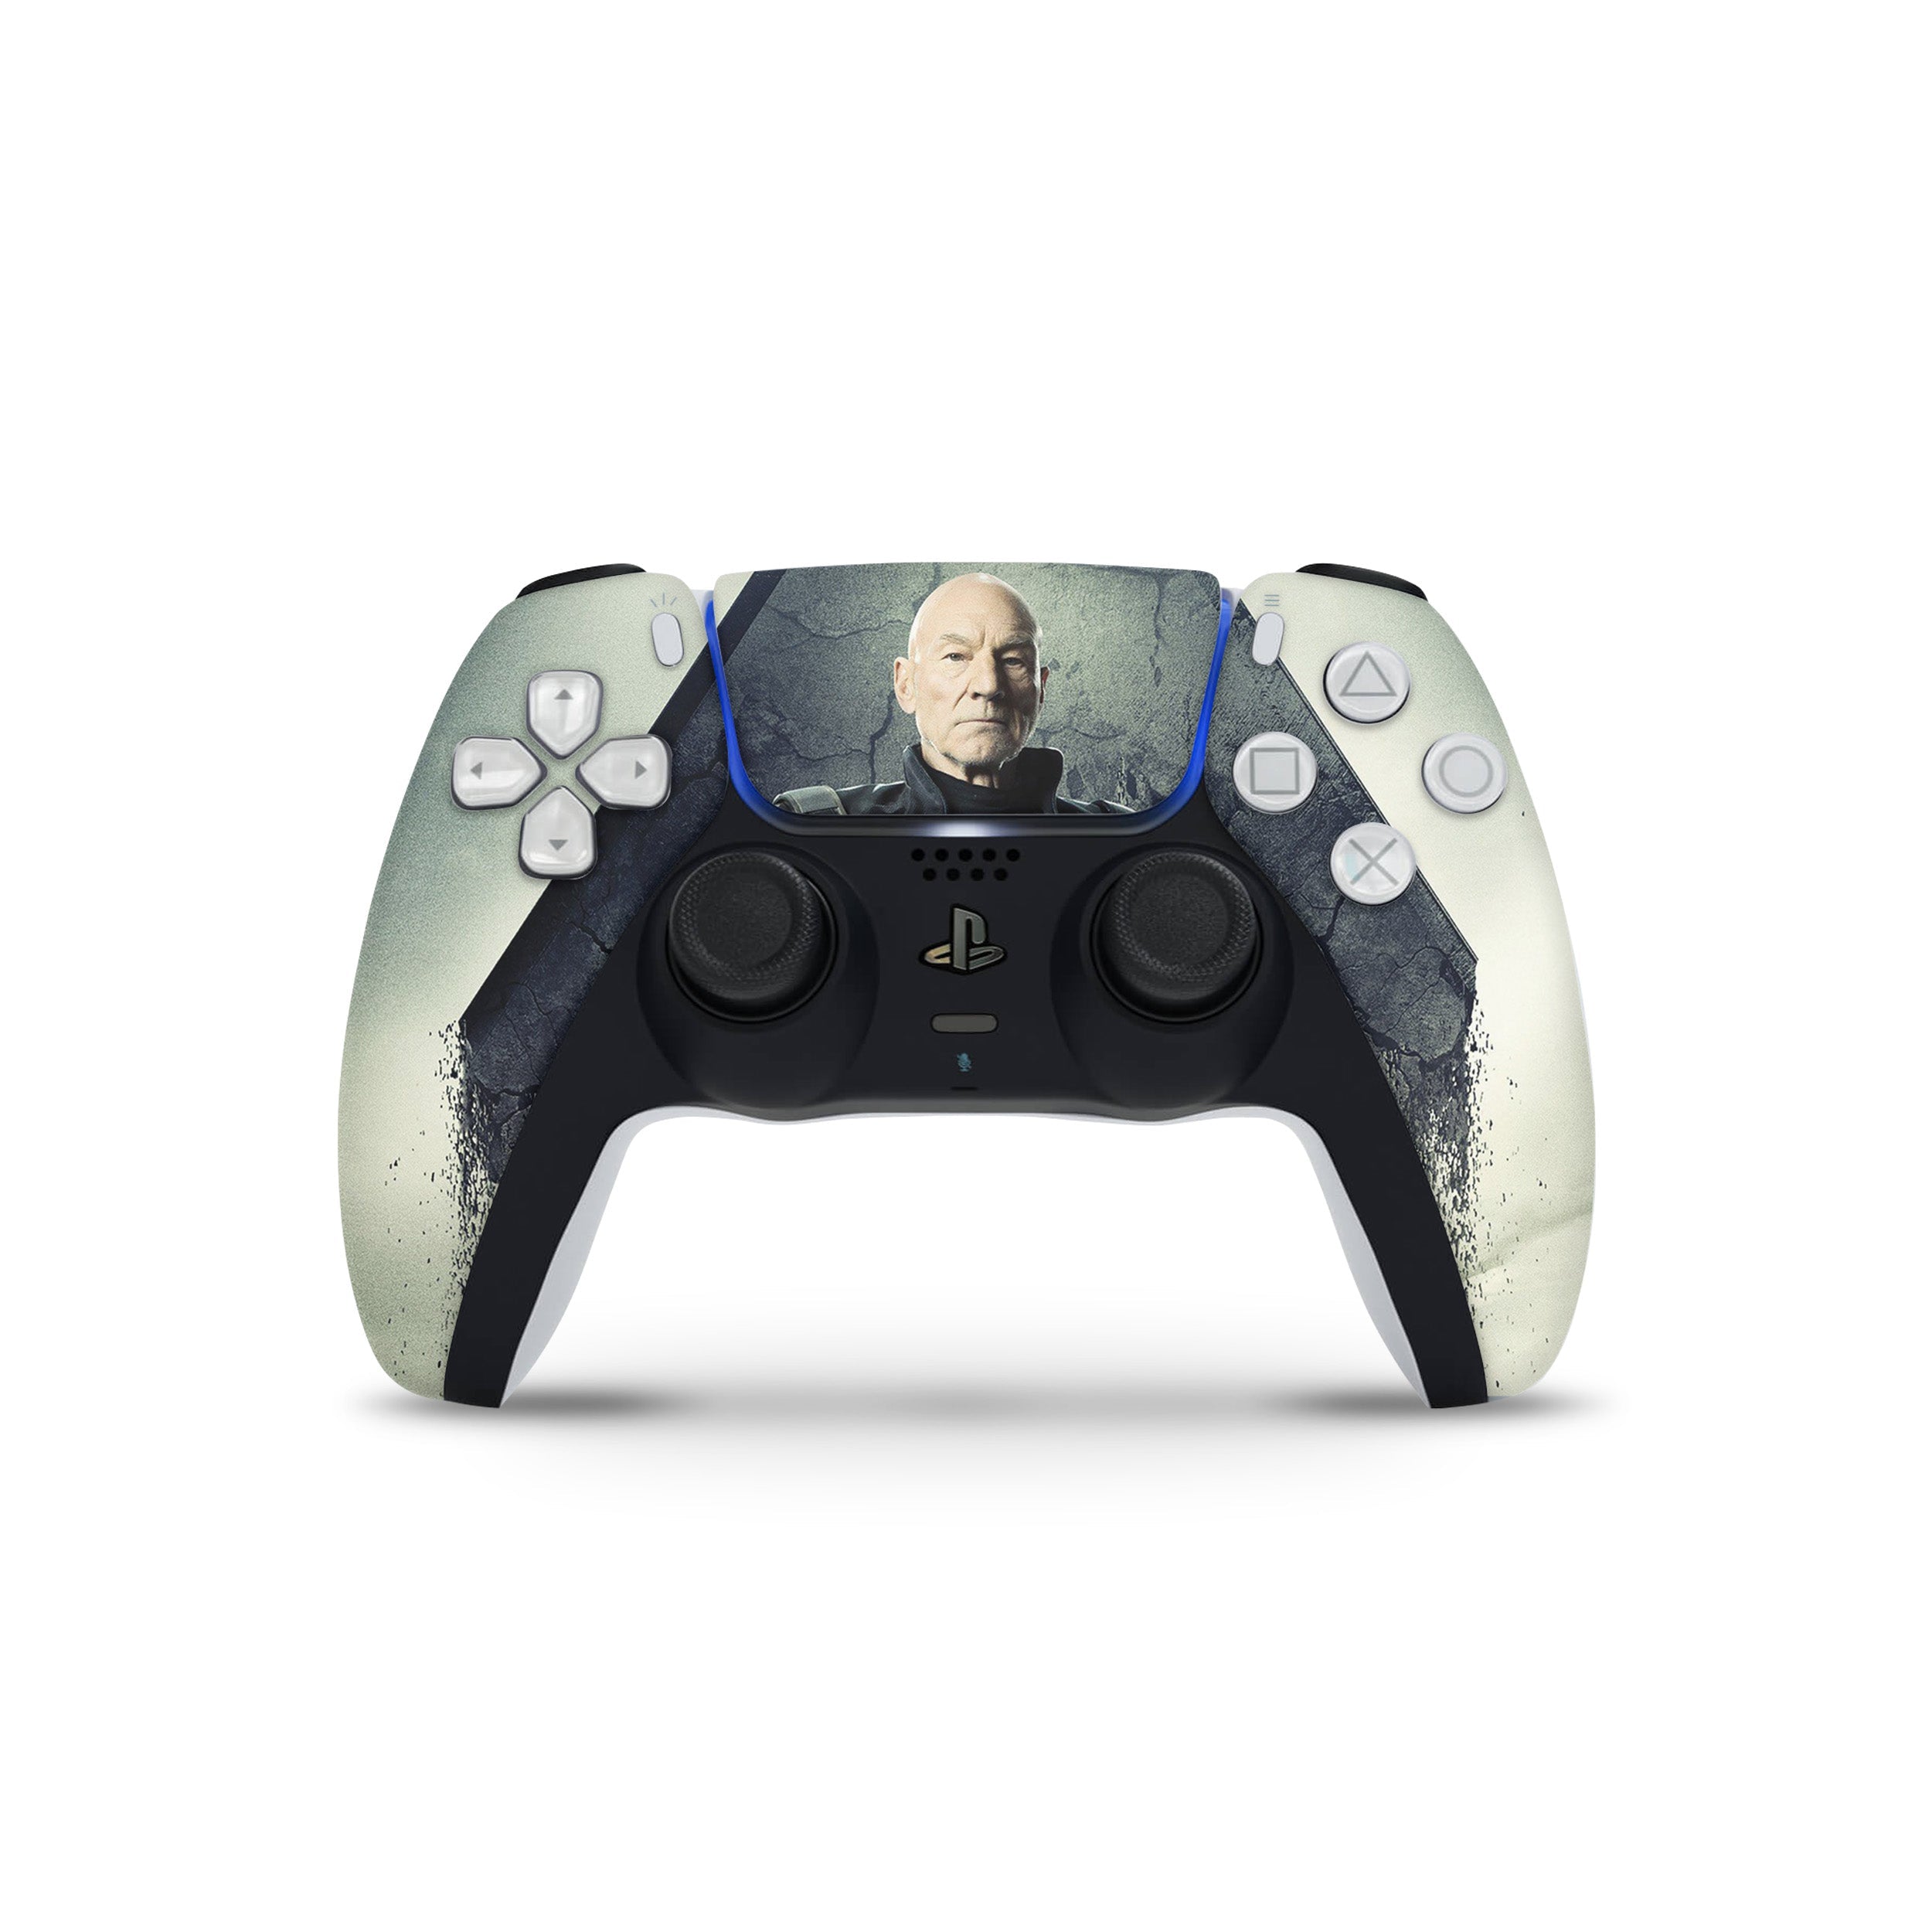 A video game skin featuring a Marvel X Men Professor X design for the PS5 DualSense Controller.